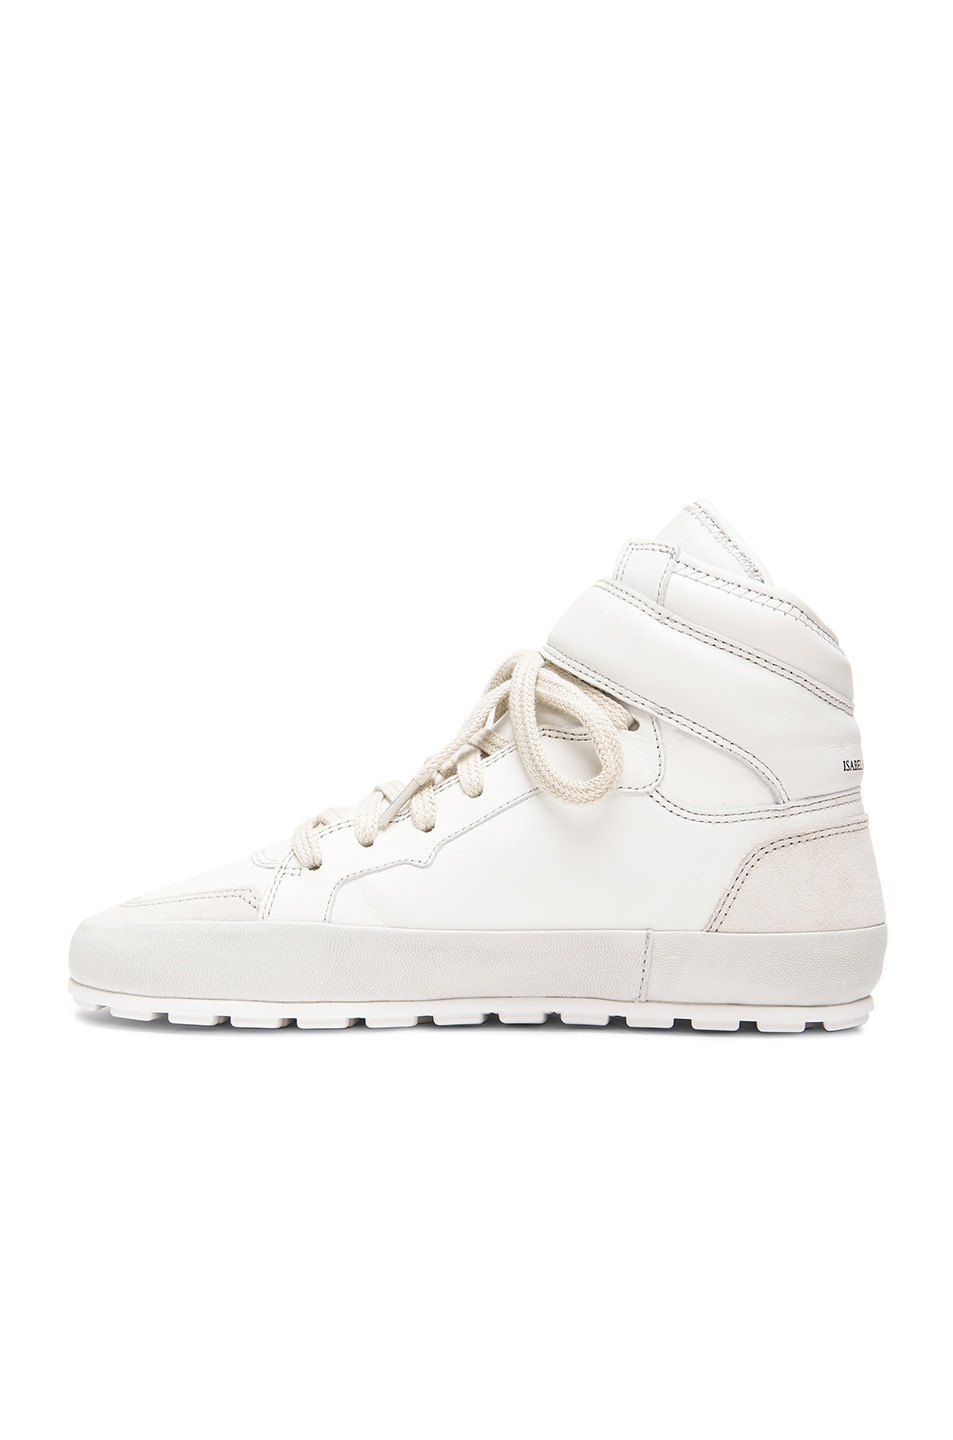 Isabel Marant Etoile Bessy Hip Hop Leather Sneakers in White | FWRD